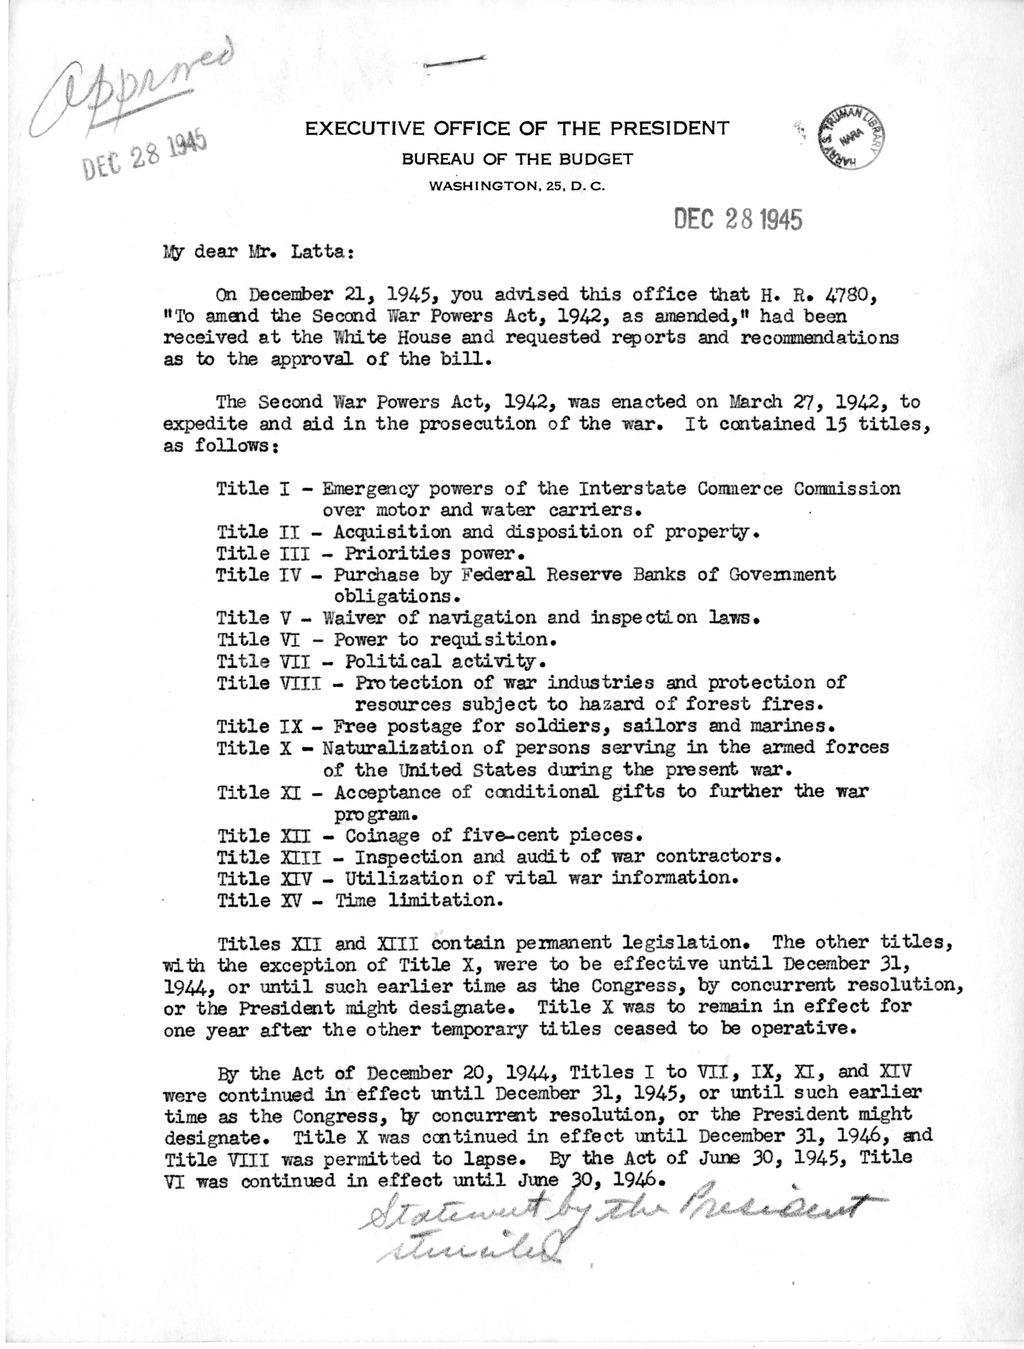 Memorandum from Harold D. Smith to M. C. Latta, H.R. 4780, To Amend the Second War Powers Act, 1942, as Amended, with Attachments